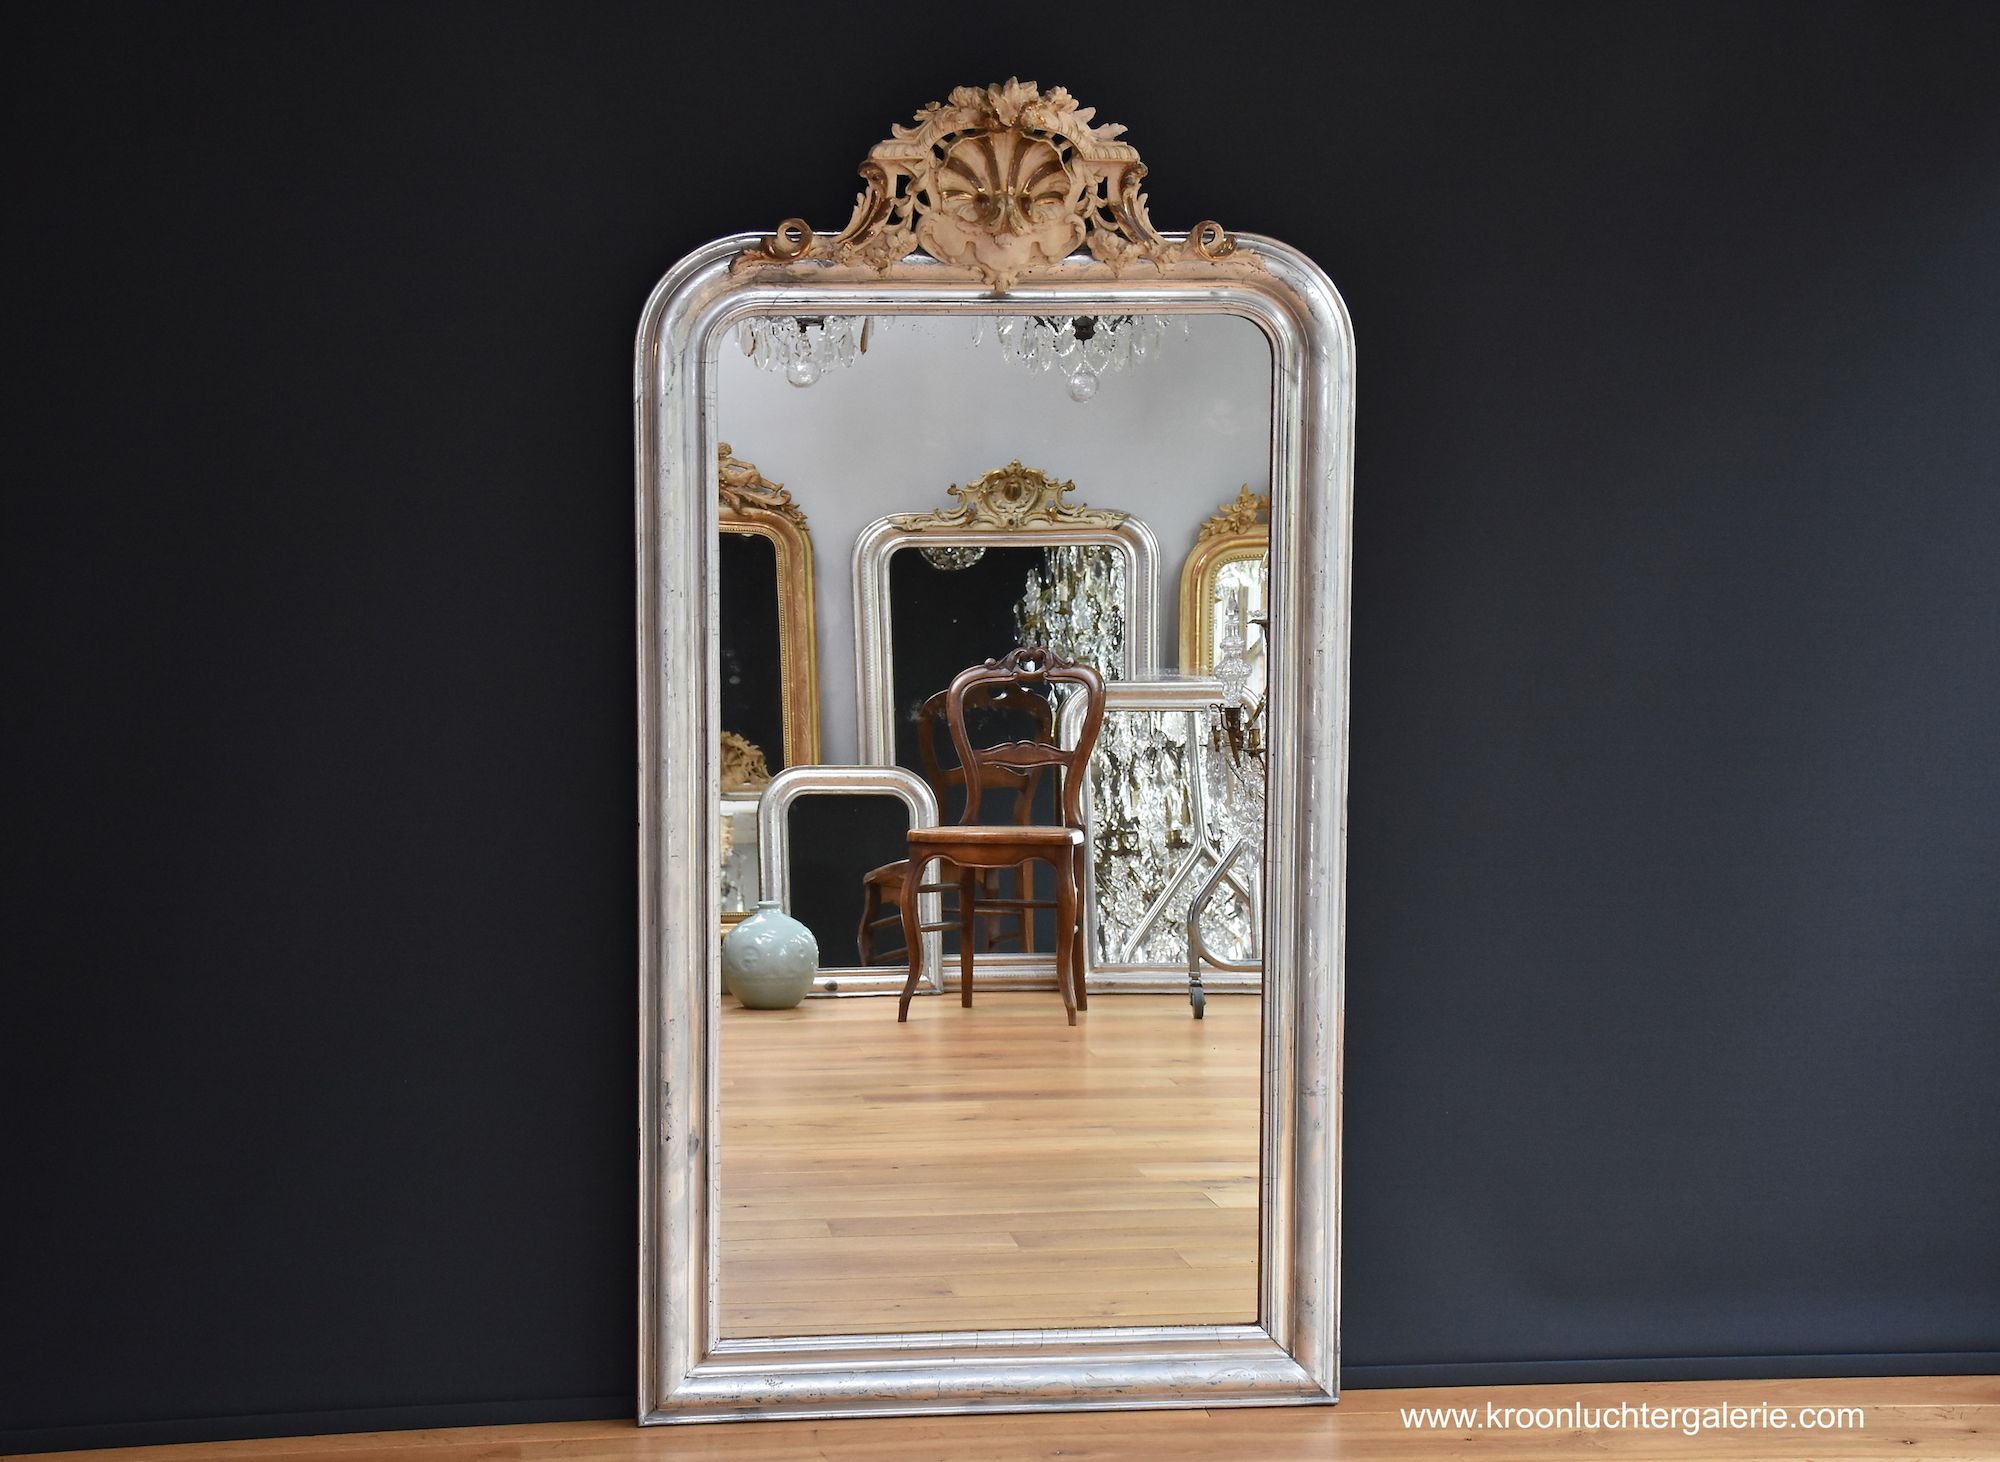 Large antique French mirror with a crest